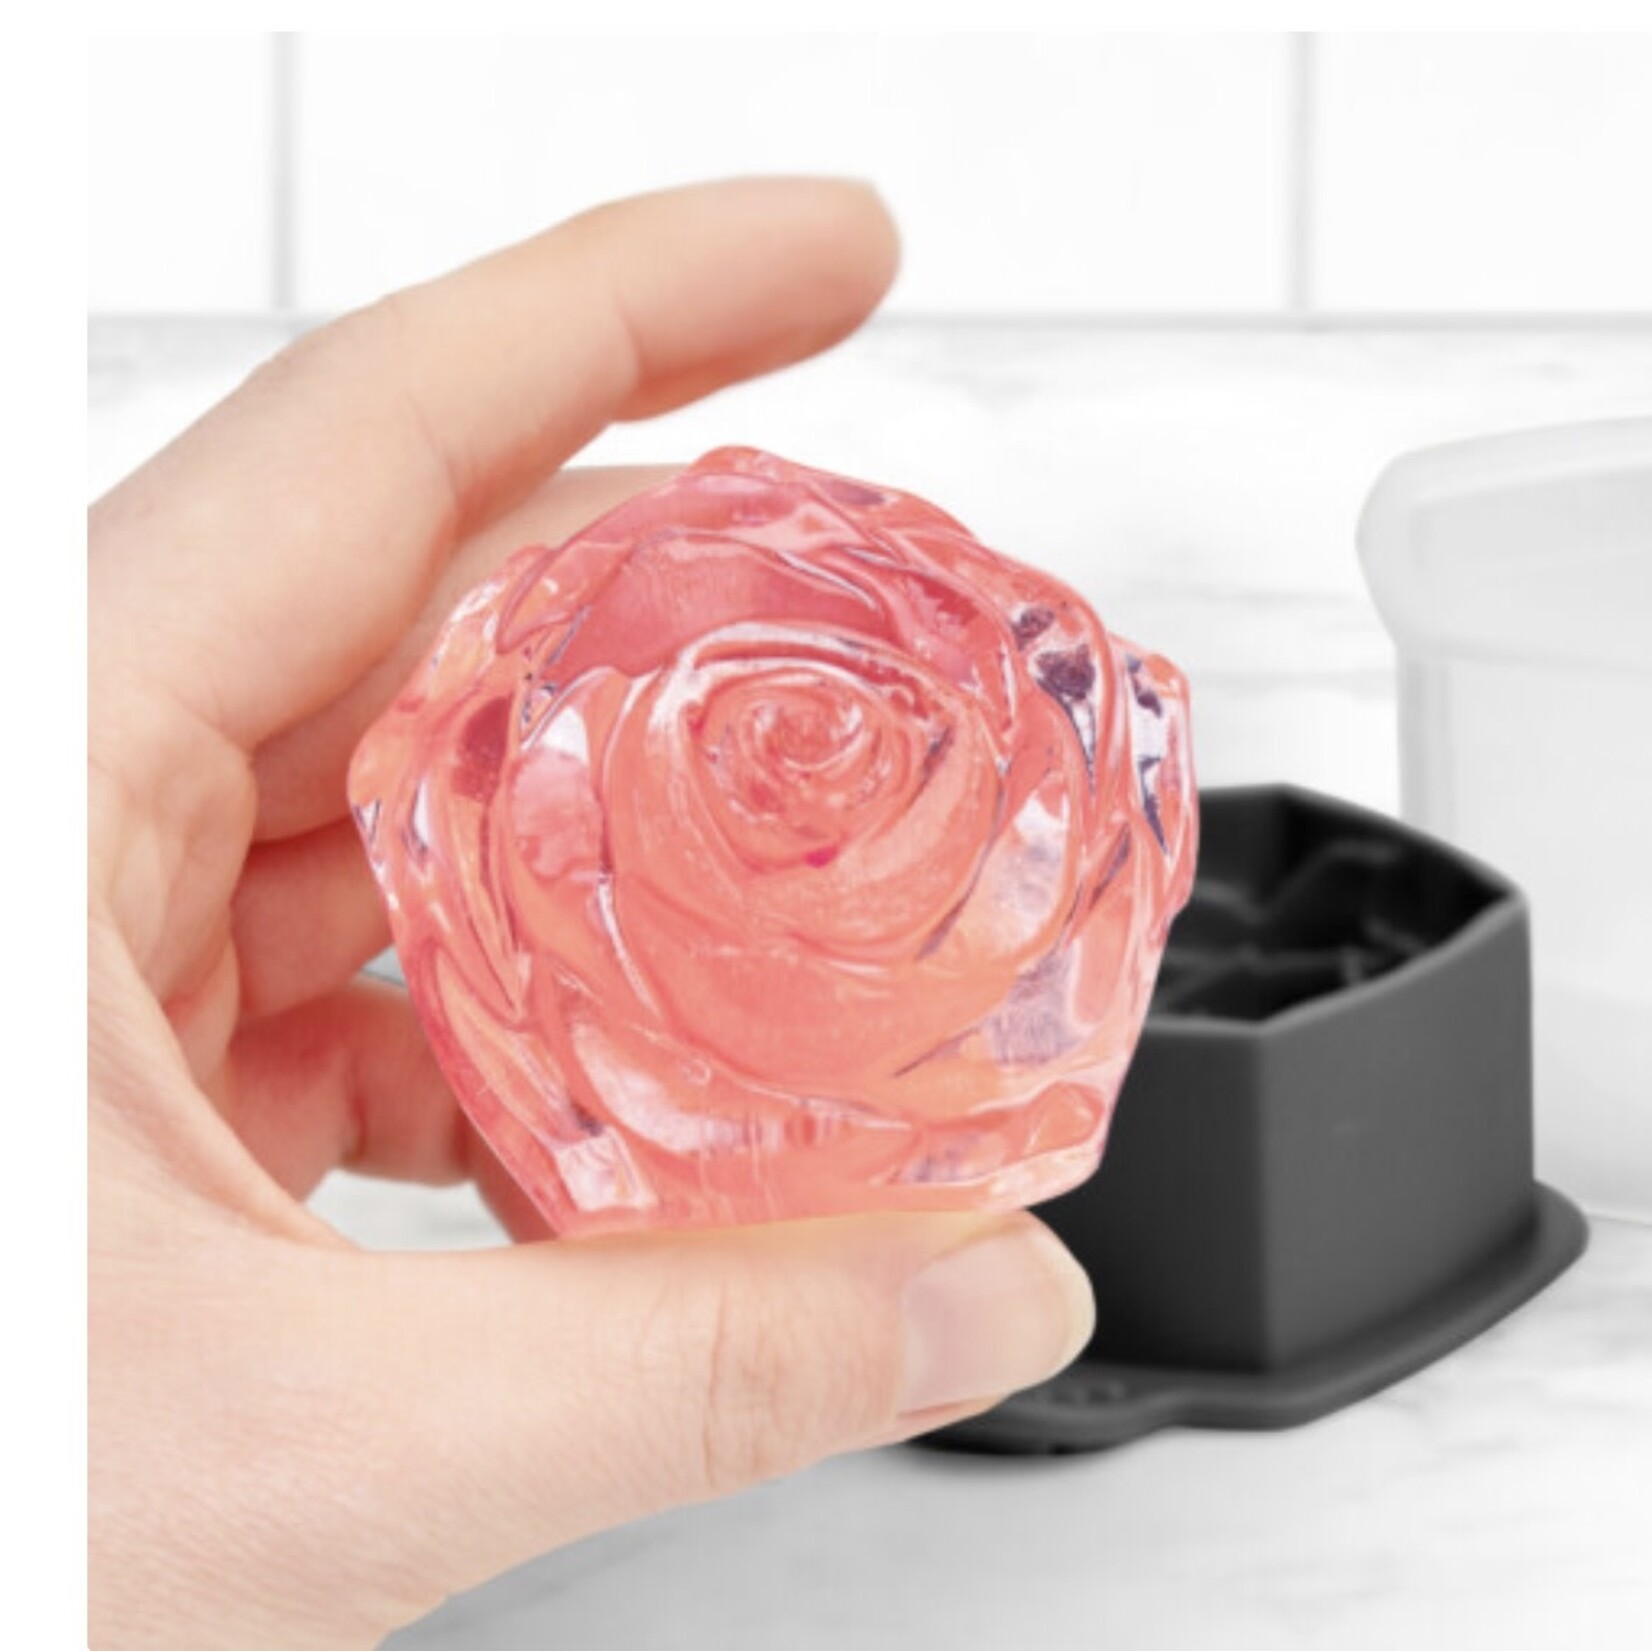 TOVOLO TOVOLO Rose Ice Molds S/2- Charcoal